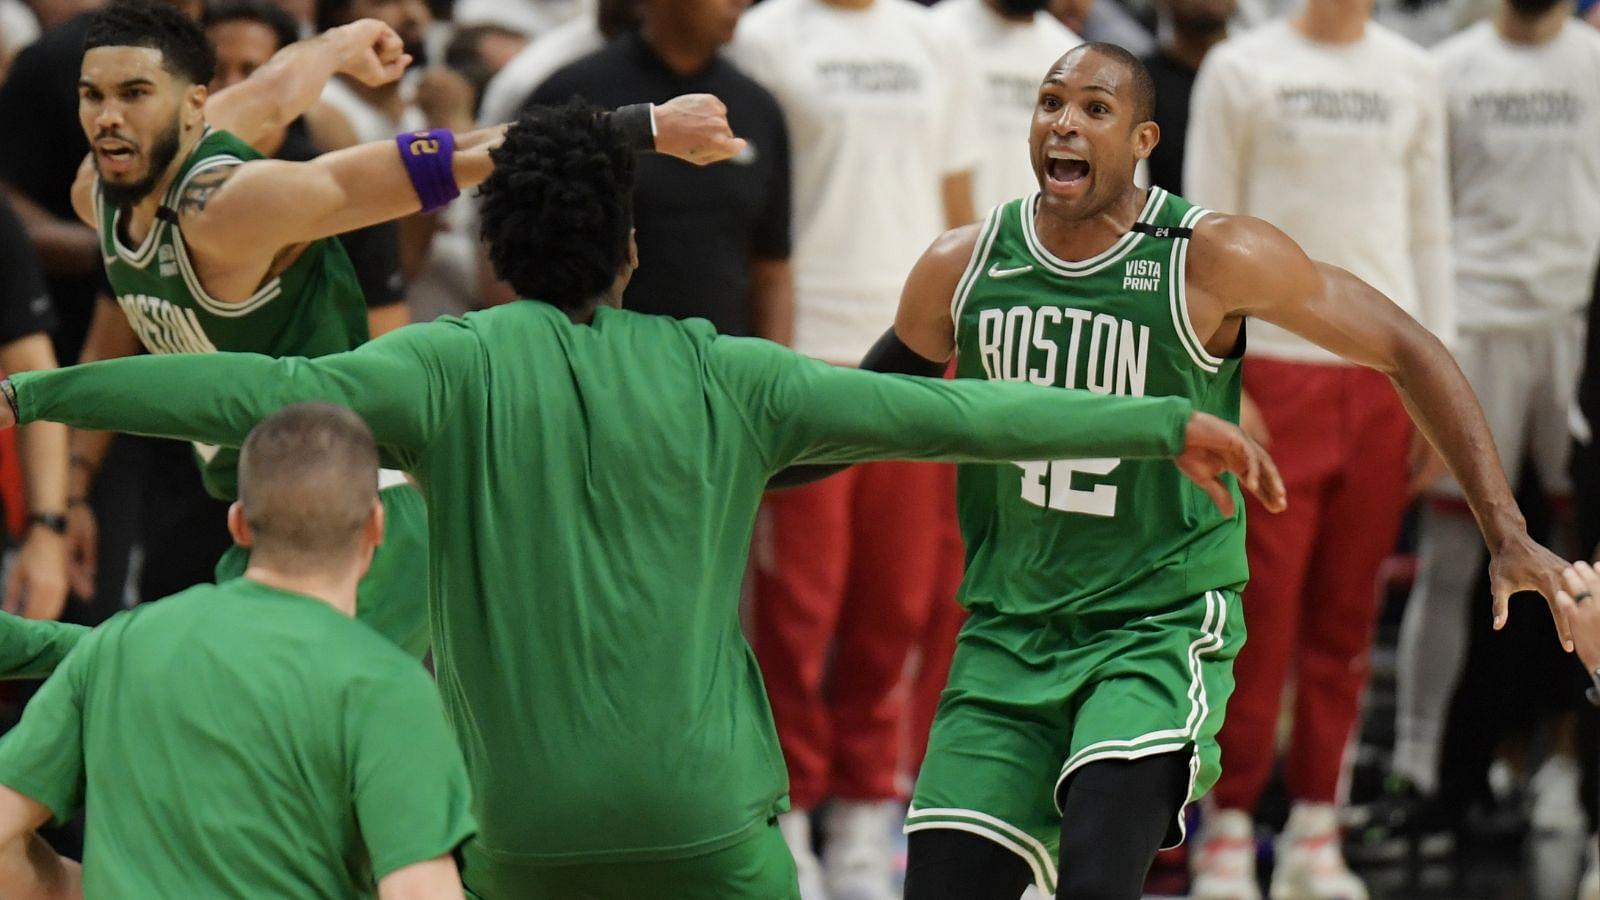 “Al Horford is the best teammate ever, the ultimate professional... he just wants to win”: Jayson Tatum has nothing for the Celtics Big but compliments and respect like everyone in Boston